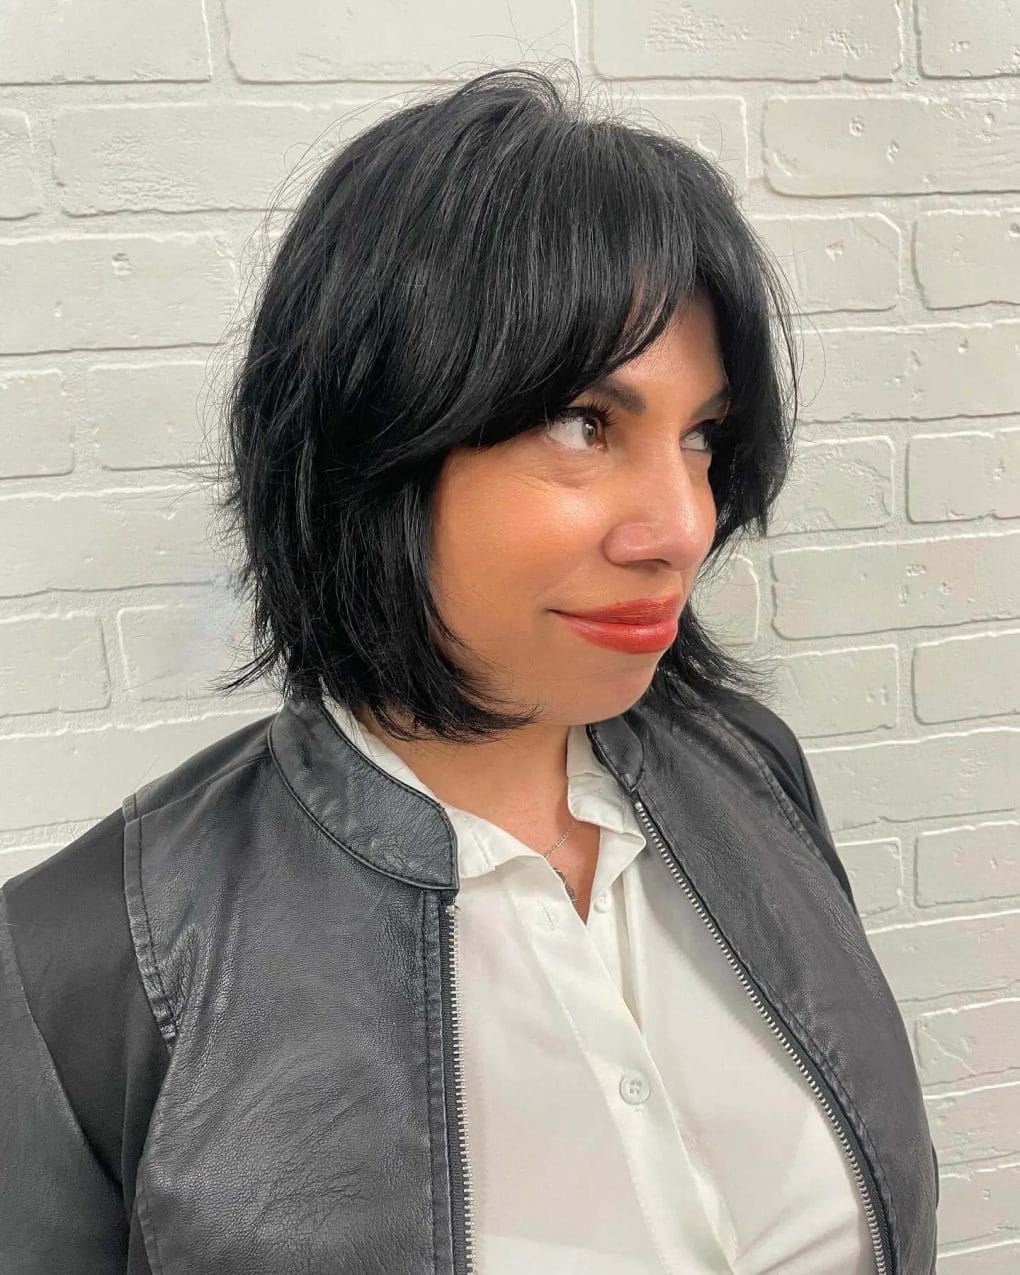 Shaggy bob with seamless black tones and chic full bangs